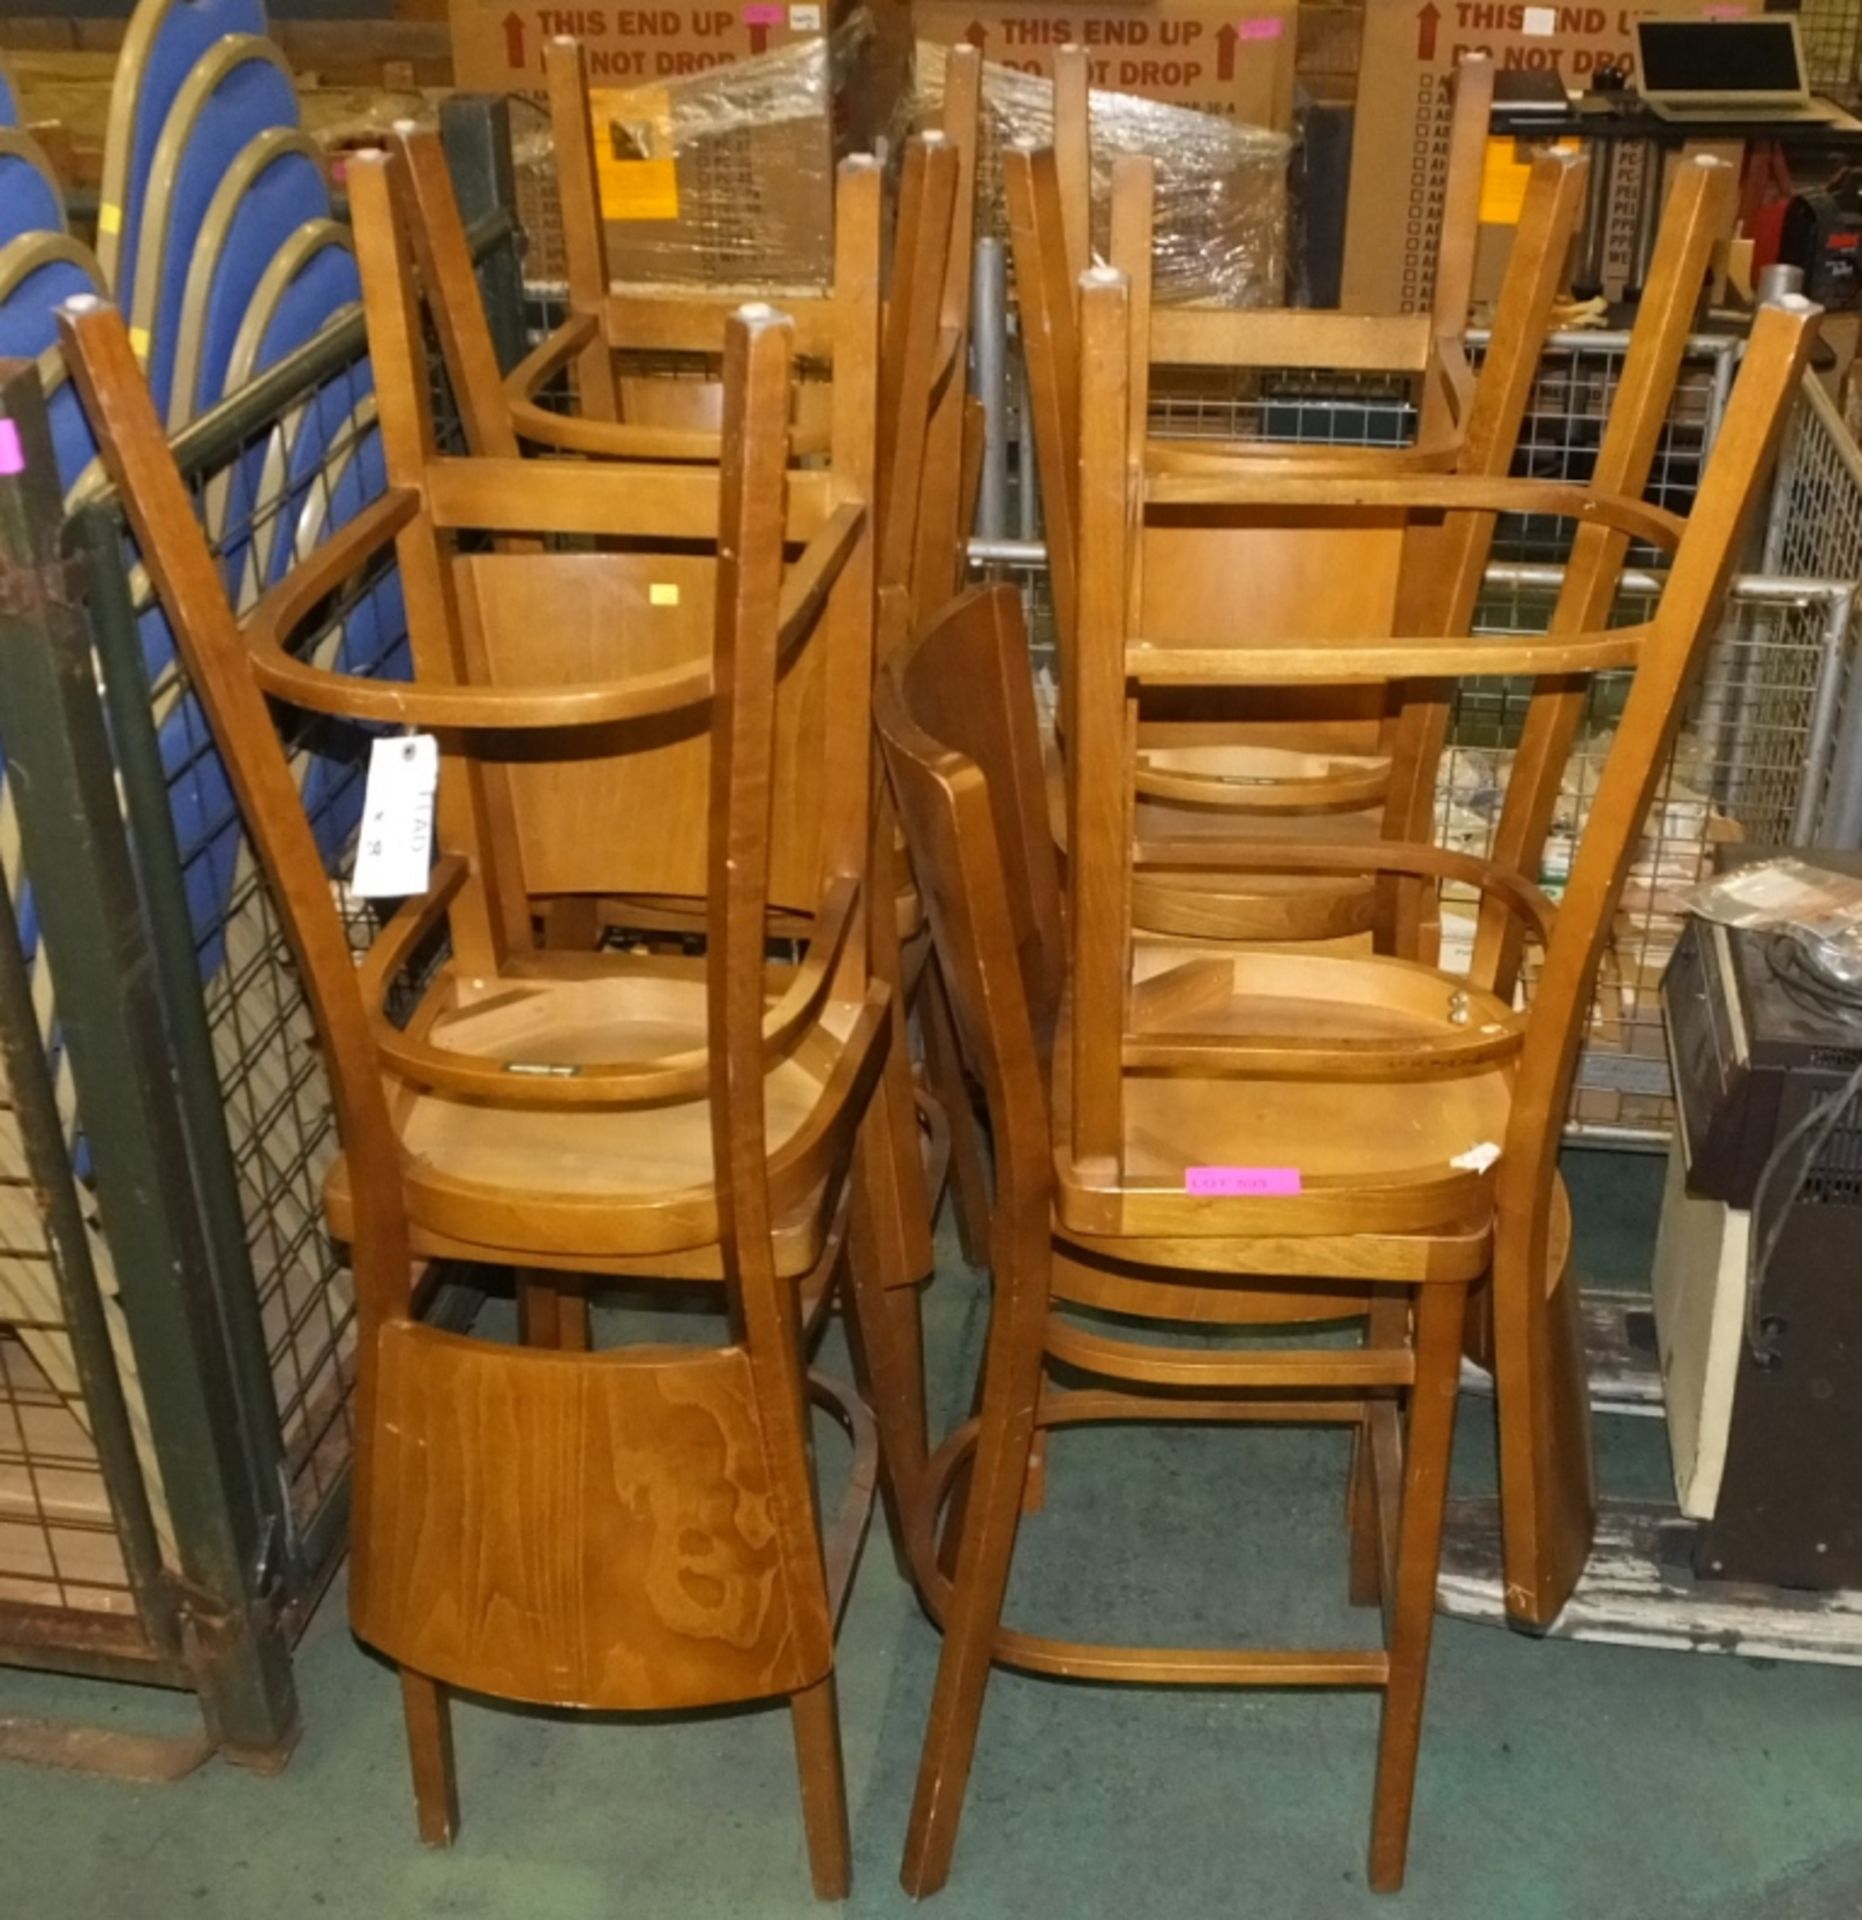 8x Chairs Wooden Framed